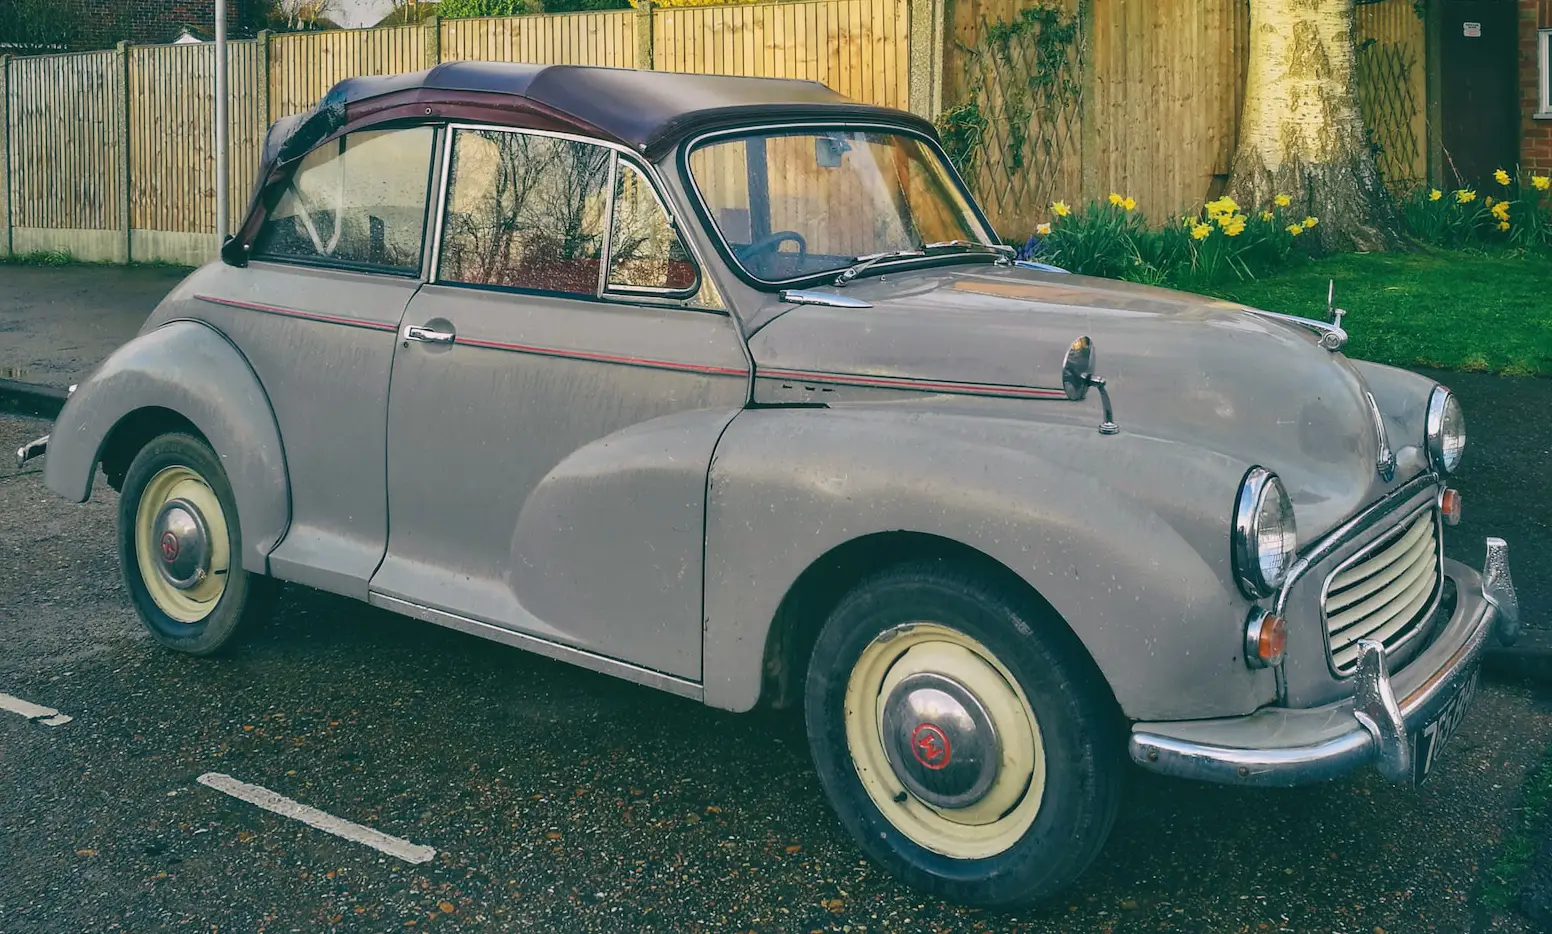 vintage morris car parked in a residential street